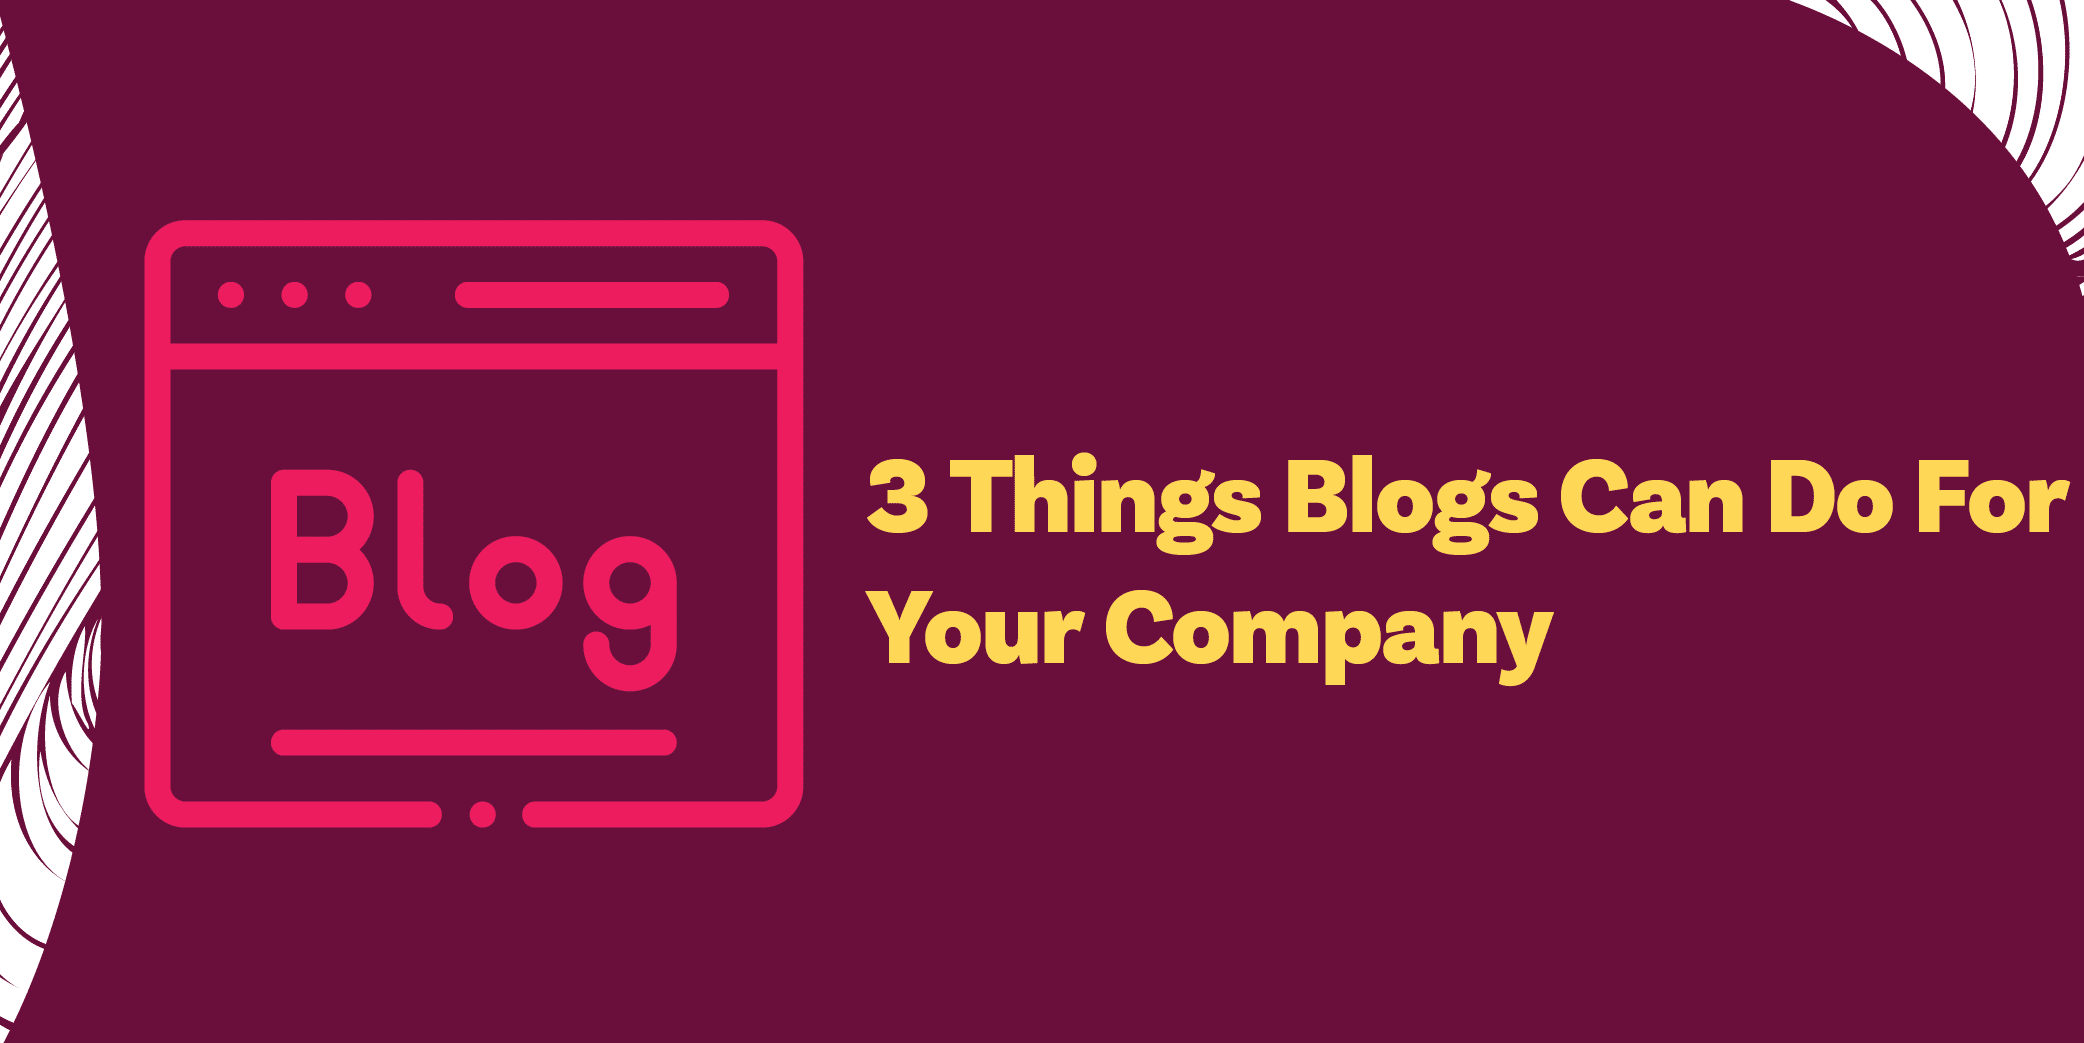 3 things blogs can do for your company